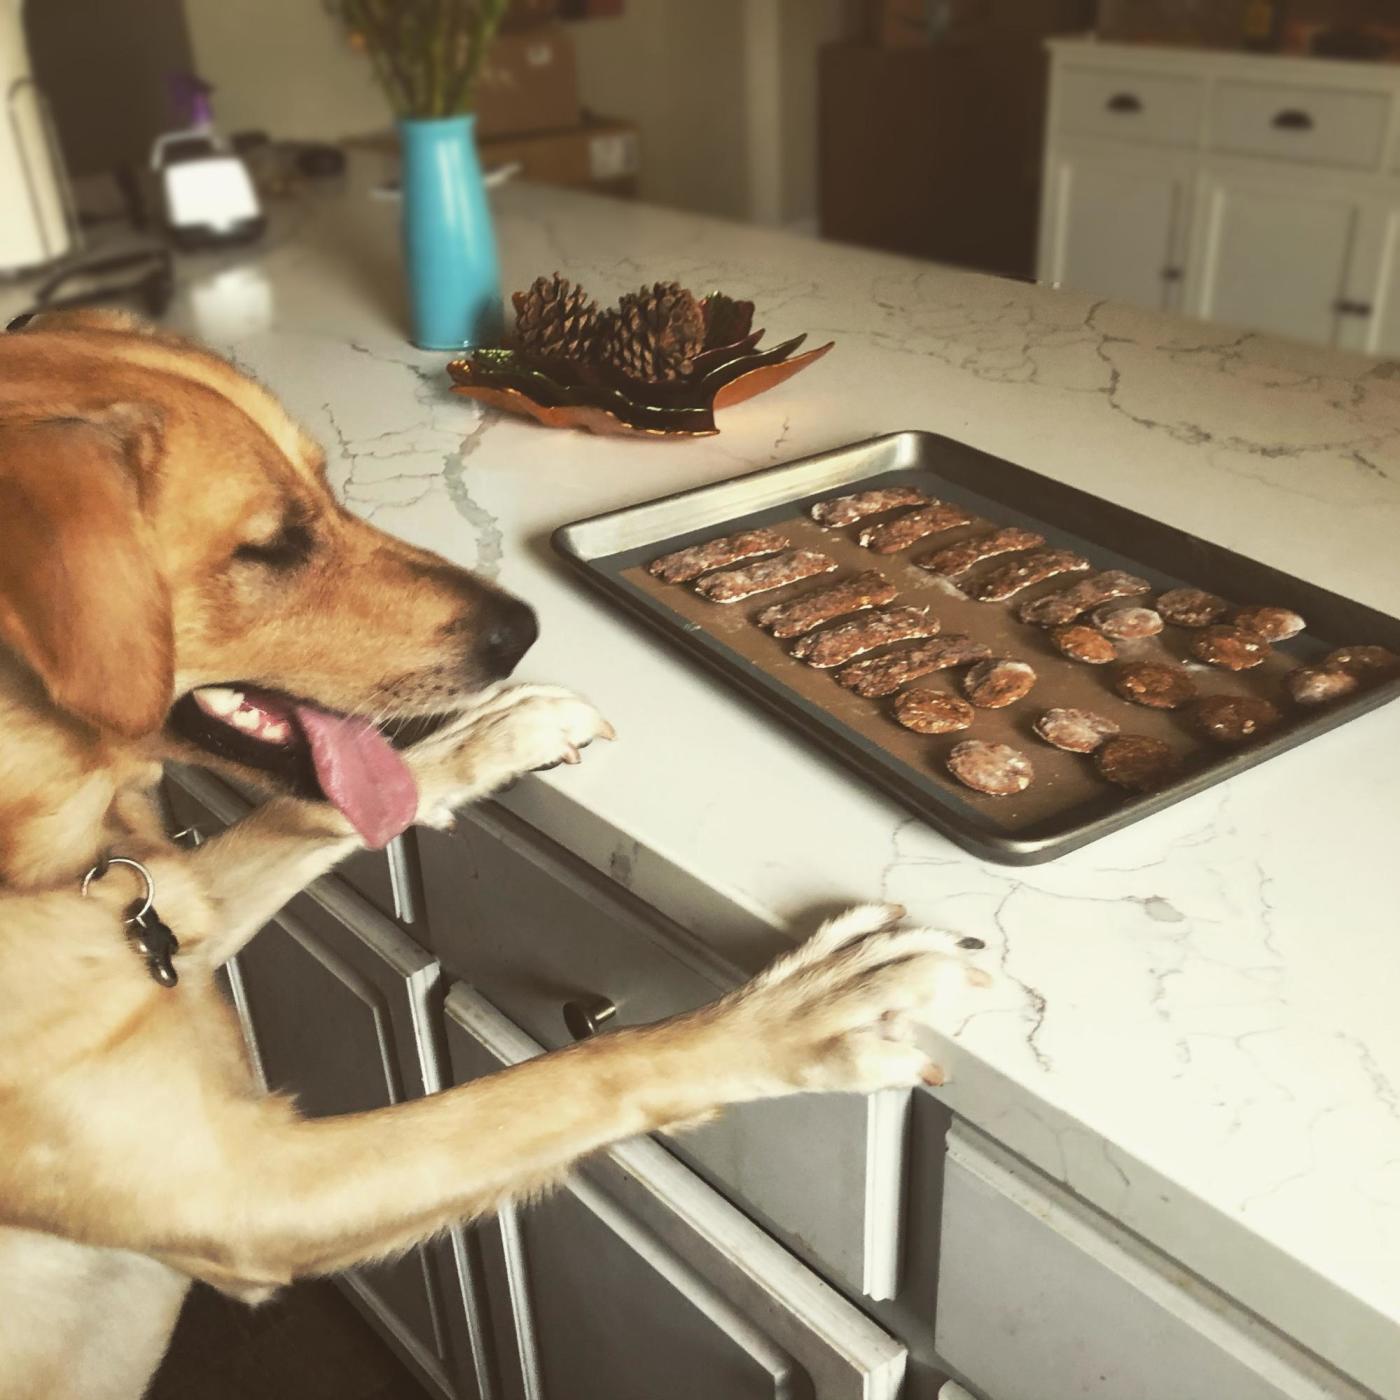 Dog sniffing treats on the counter